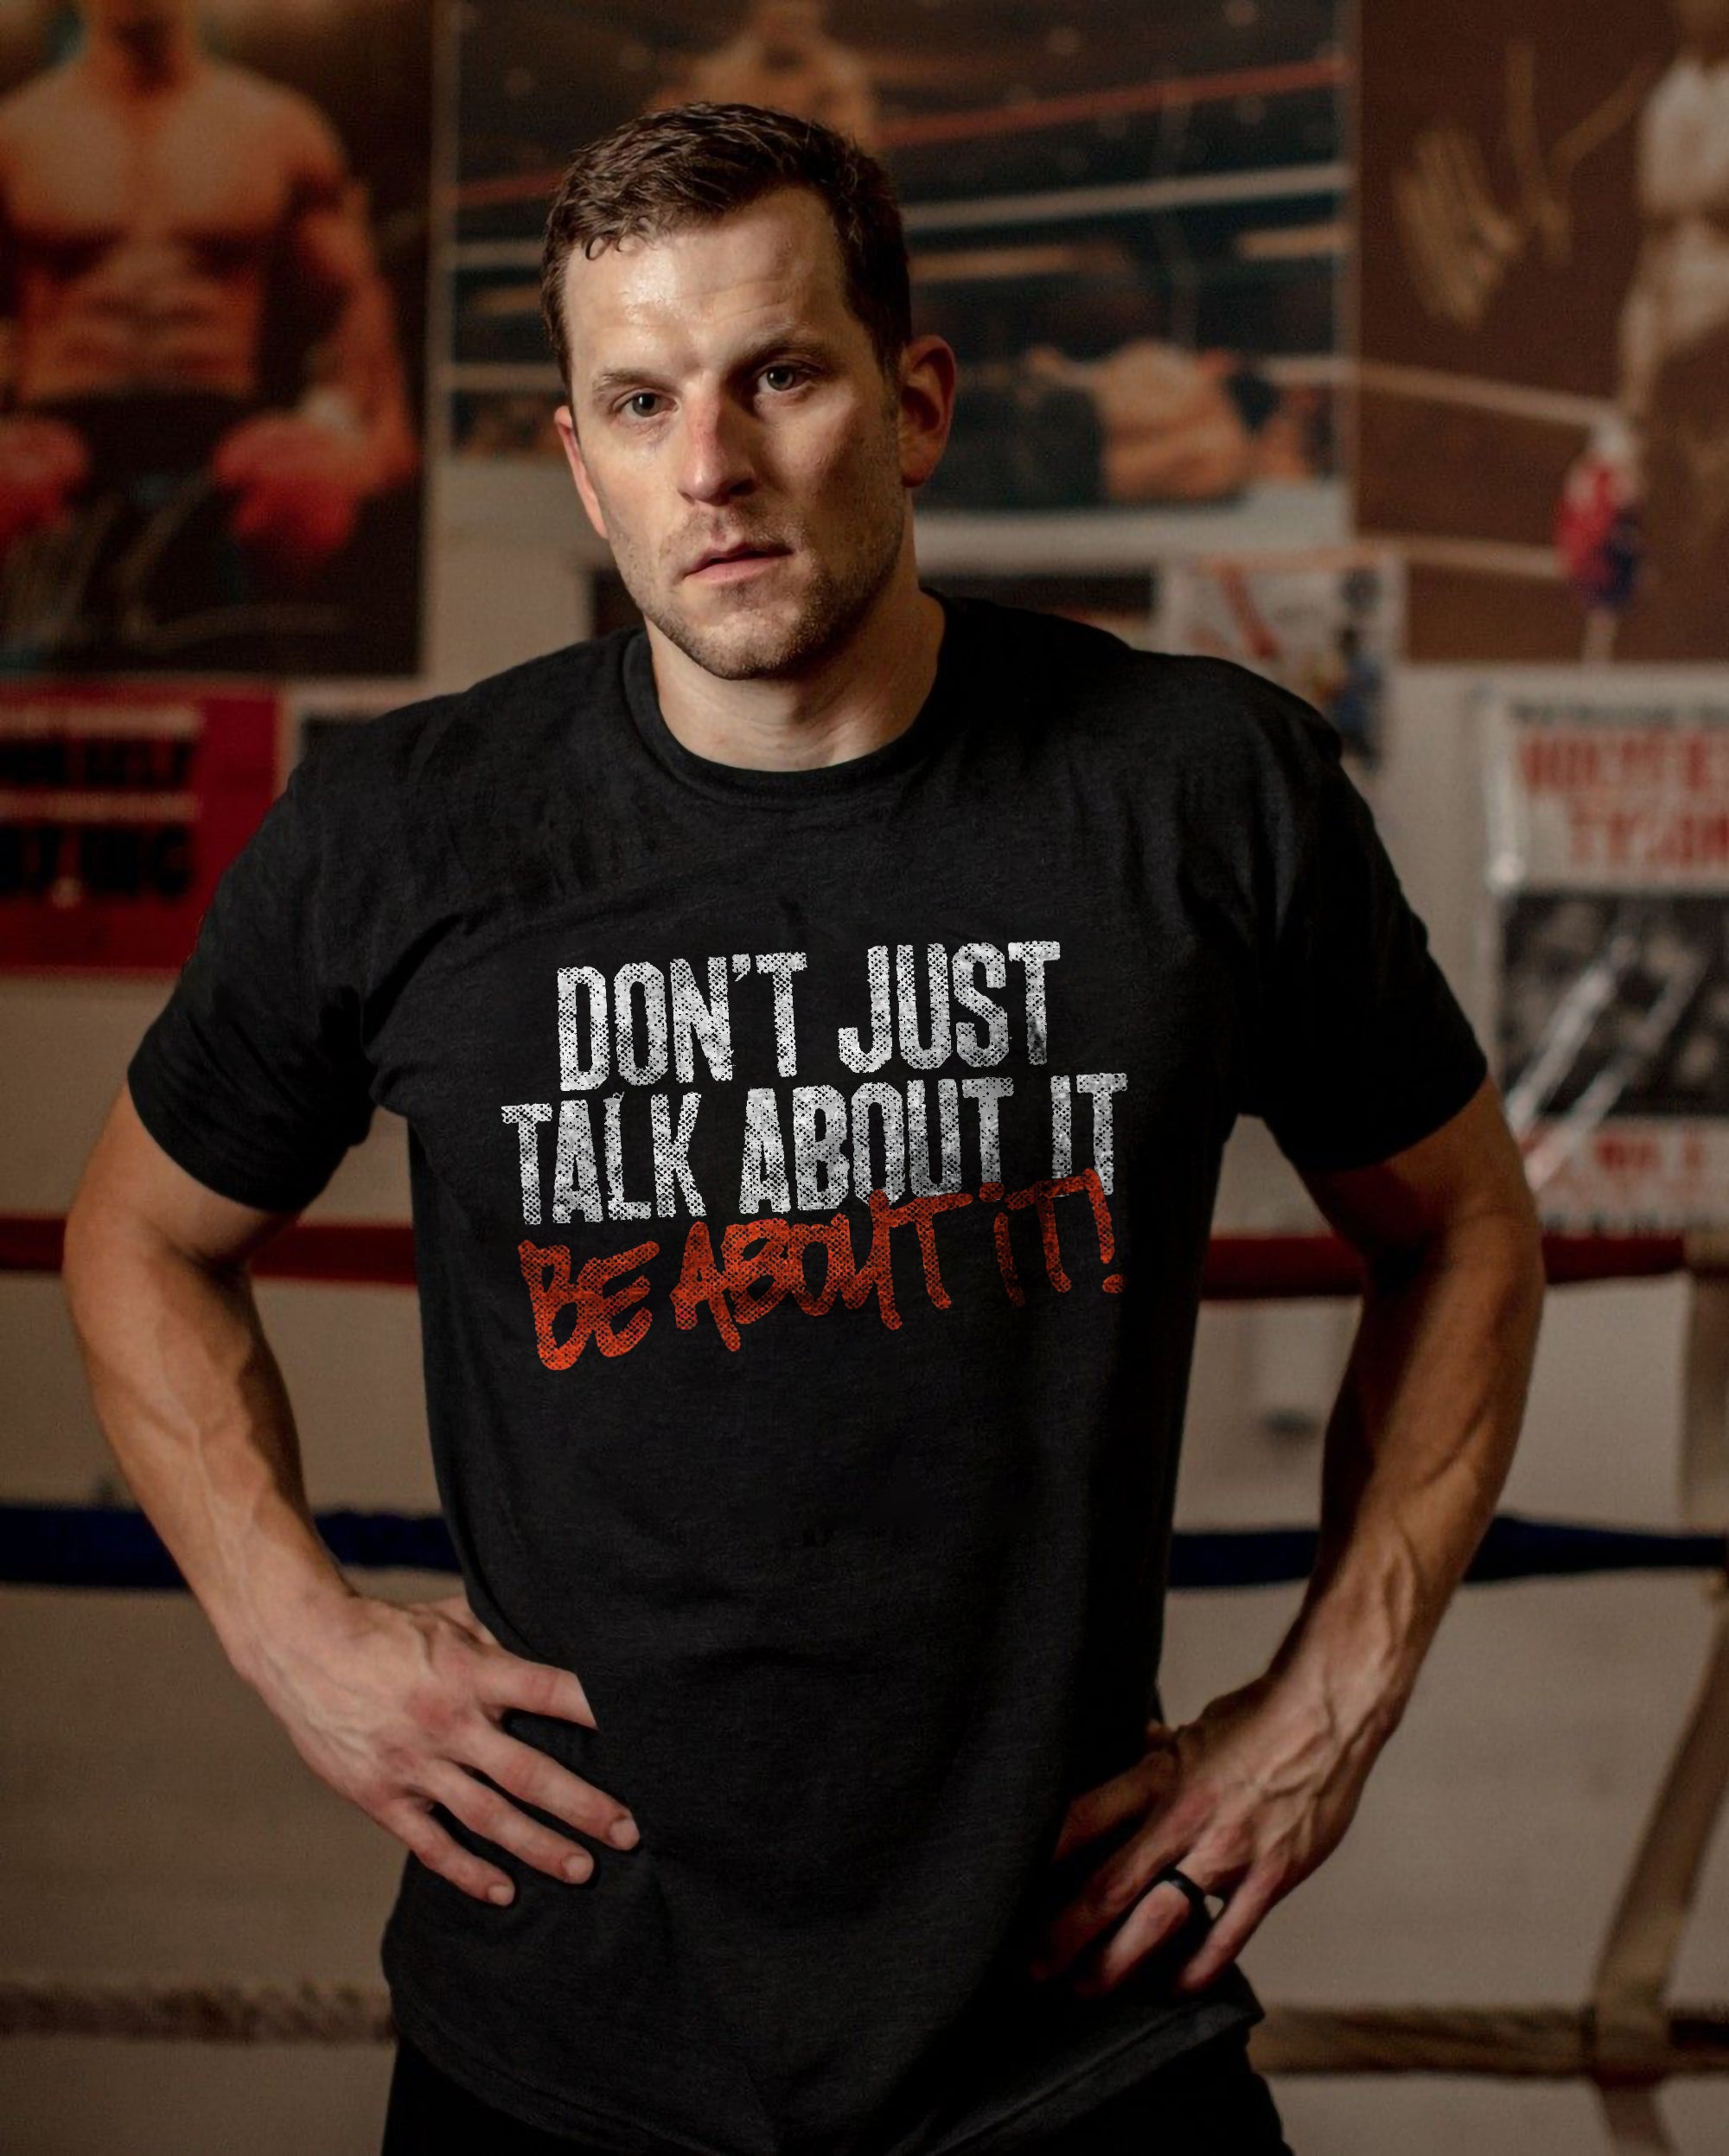 Don't Just Talk About It Be About It Printed T-shirt Sold Out